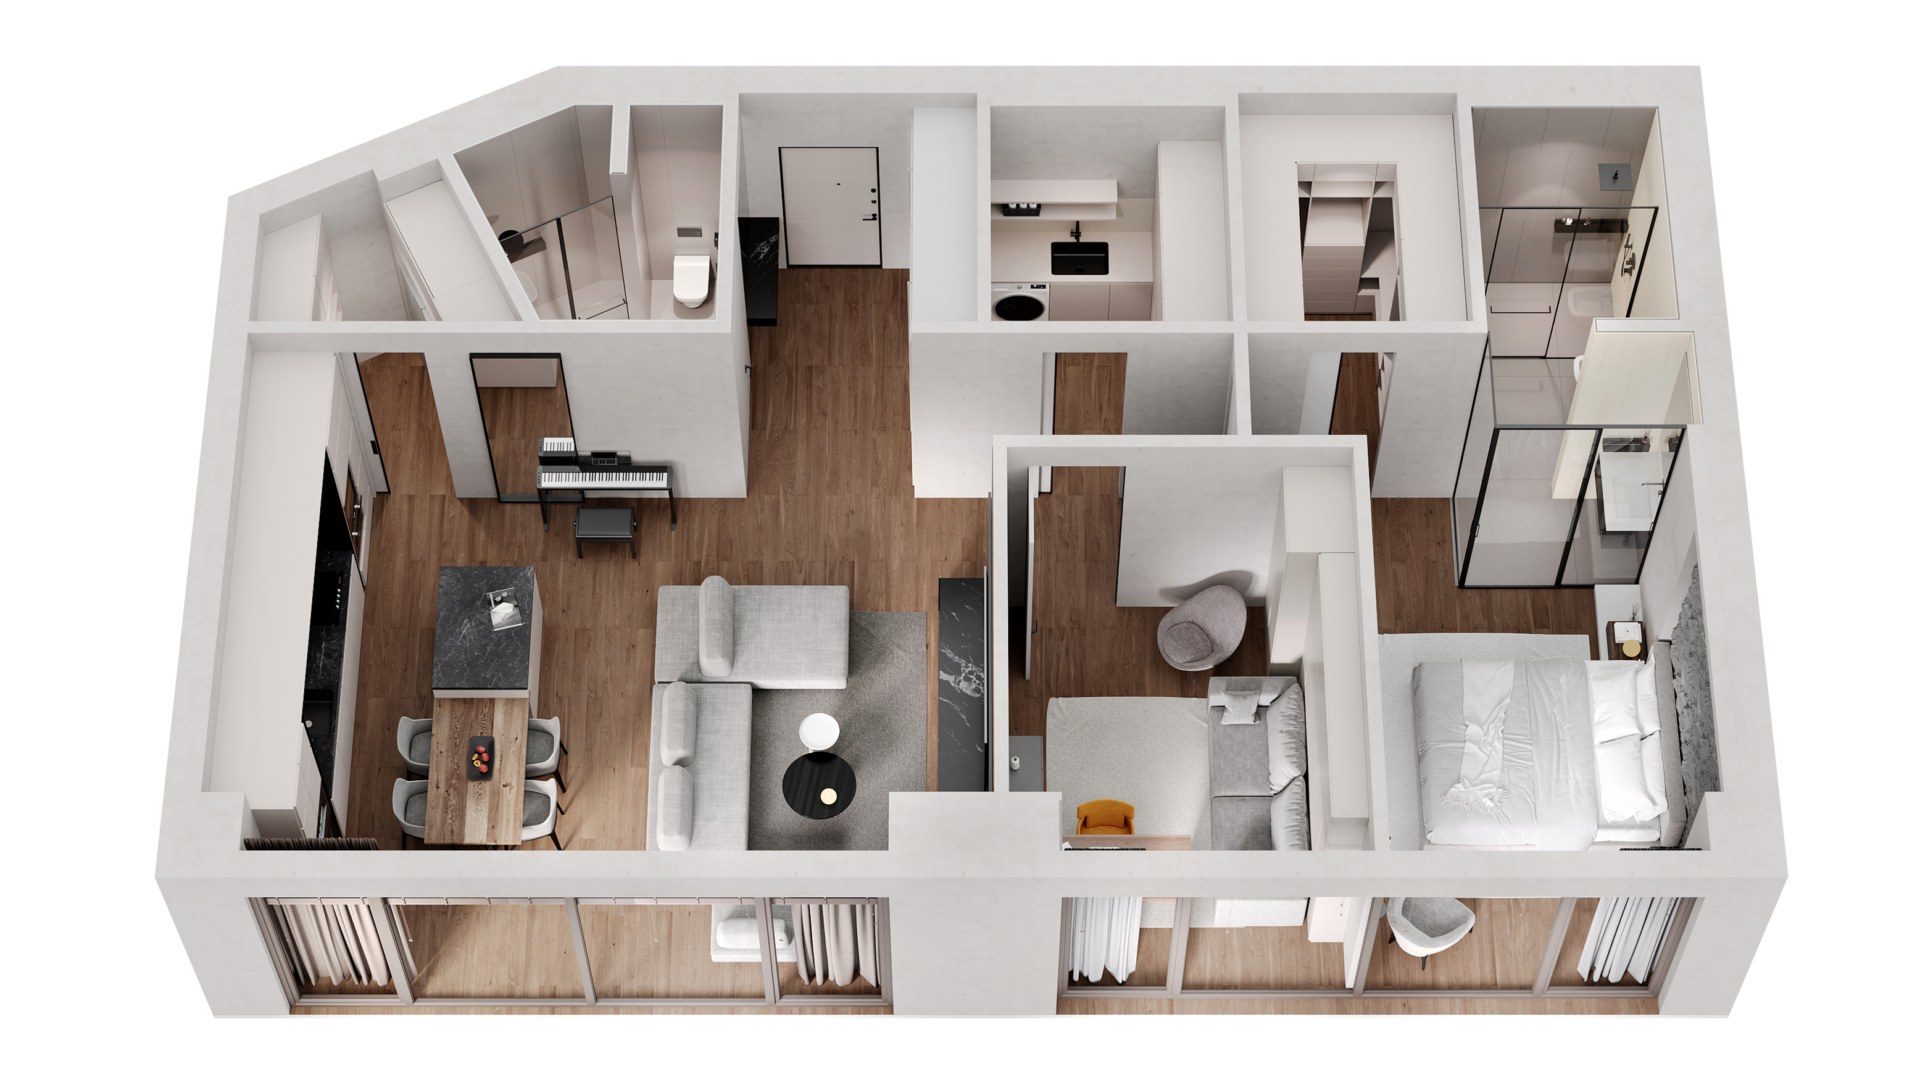 3D floor plan: top view of the house